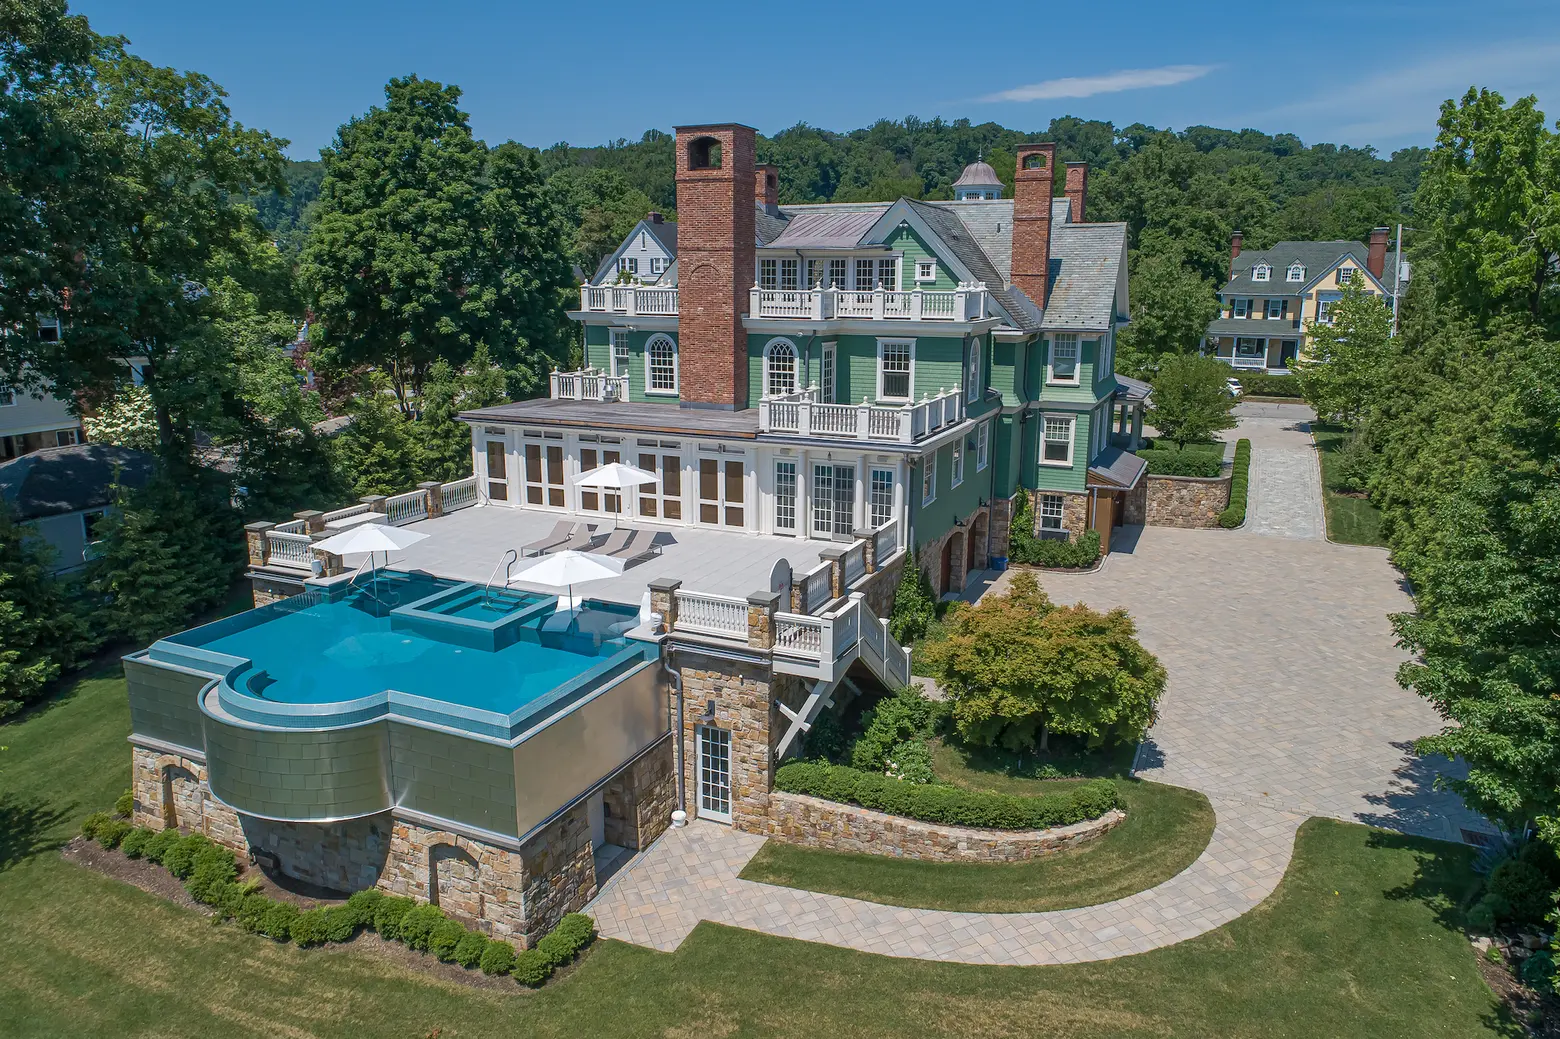 120-year-old Morristown NJ mansion has an indoor basketball court and infinity pool for $5.9M